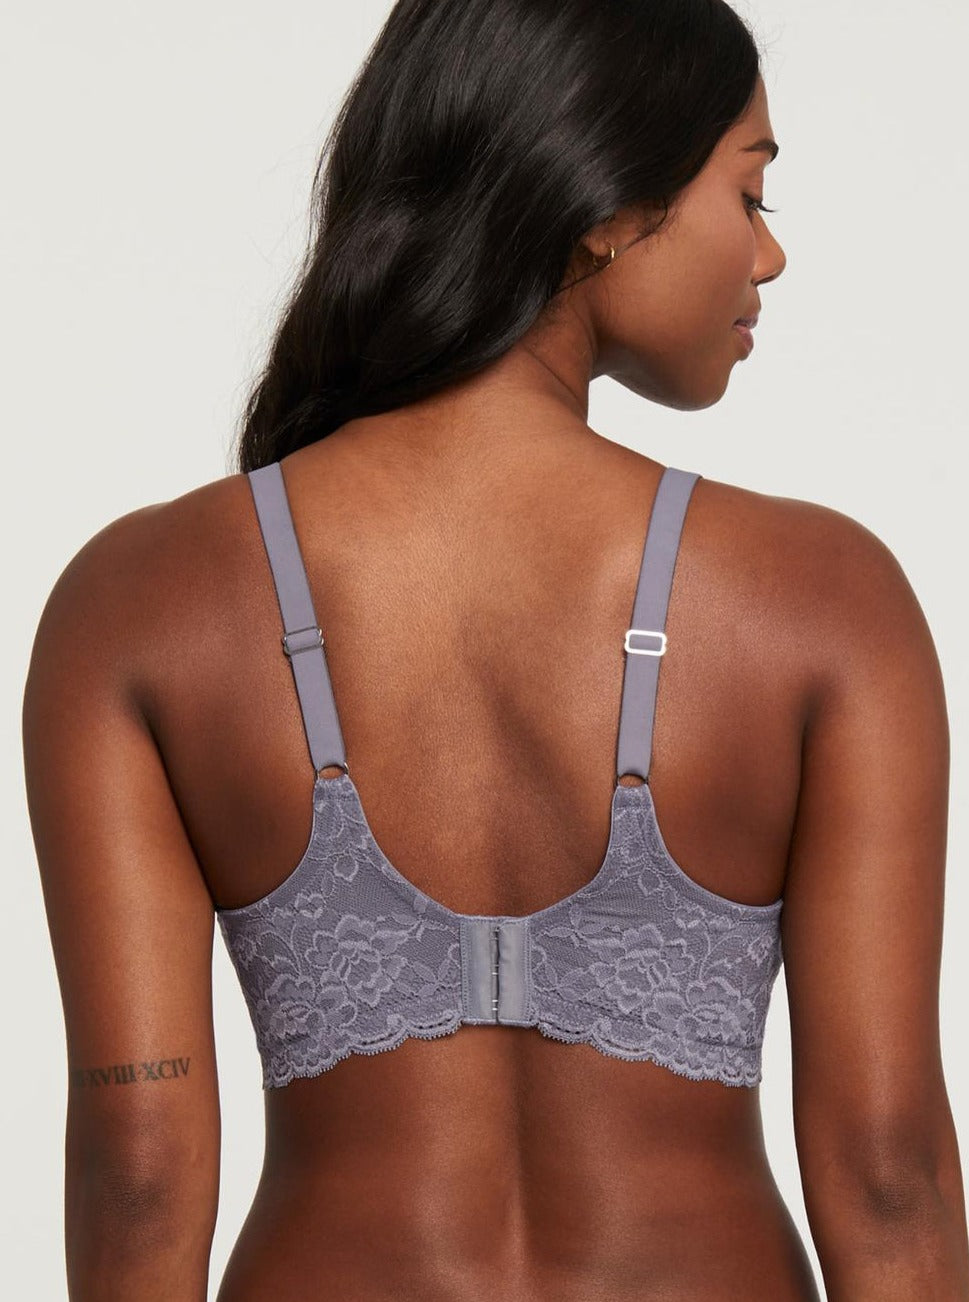 Montelle: Muse Full Cup Lace Bra - D+ Cups Only